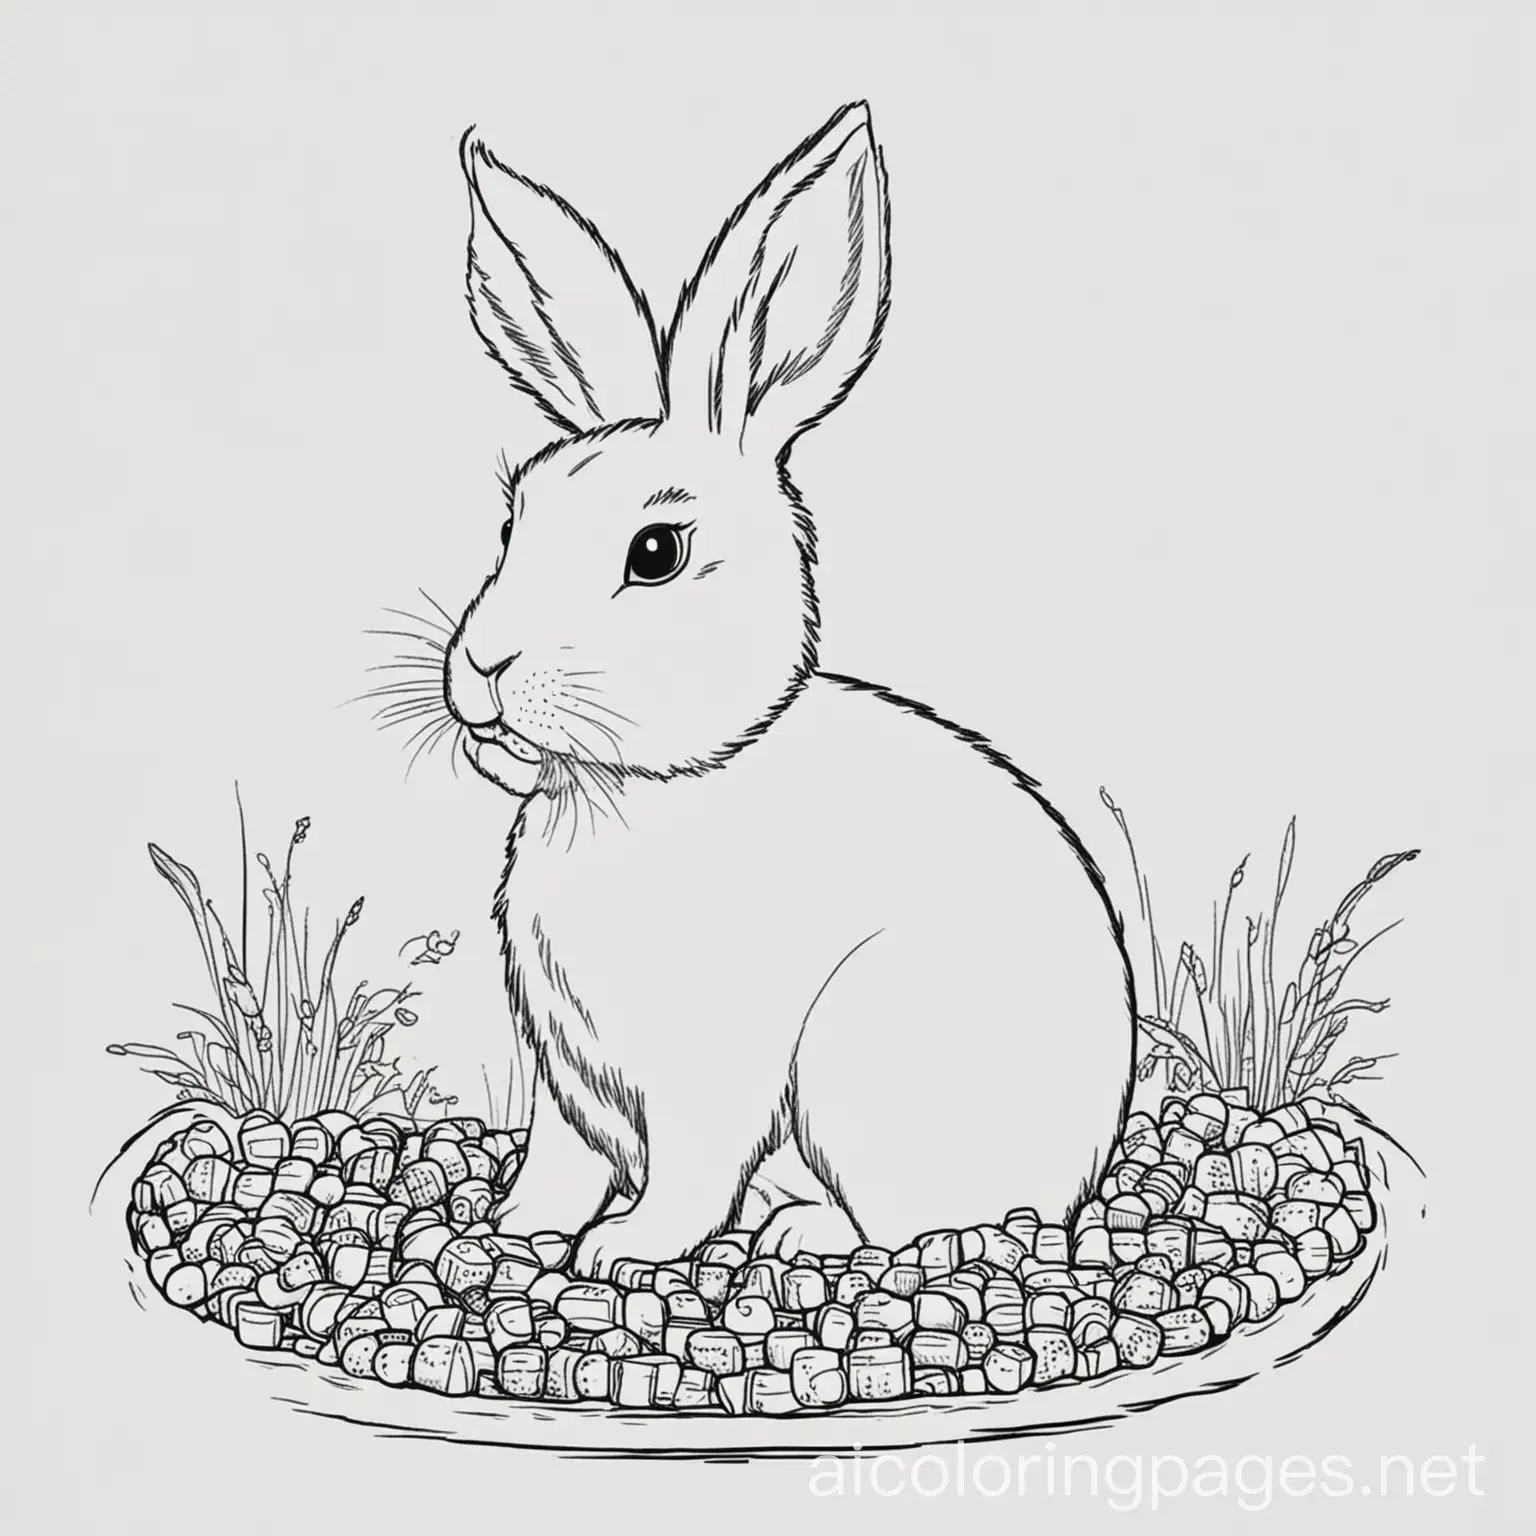 Rabbit with pellets, Coloring Page, black and white, line art, white background, Simplicity, Ample White Space. The background of the coloring page is plain white to make it easy for young children to color within the lines. The outlines of all the subjects are easy to distinguish, making it simple for kids to color without too much difficulty